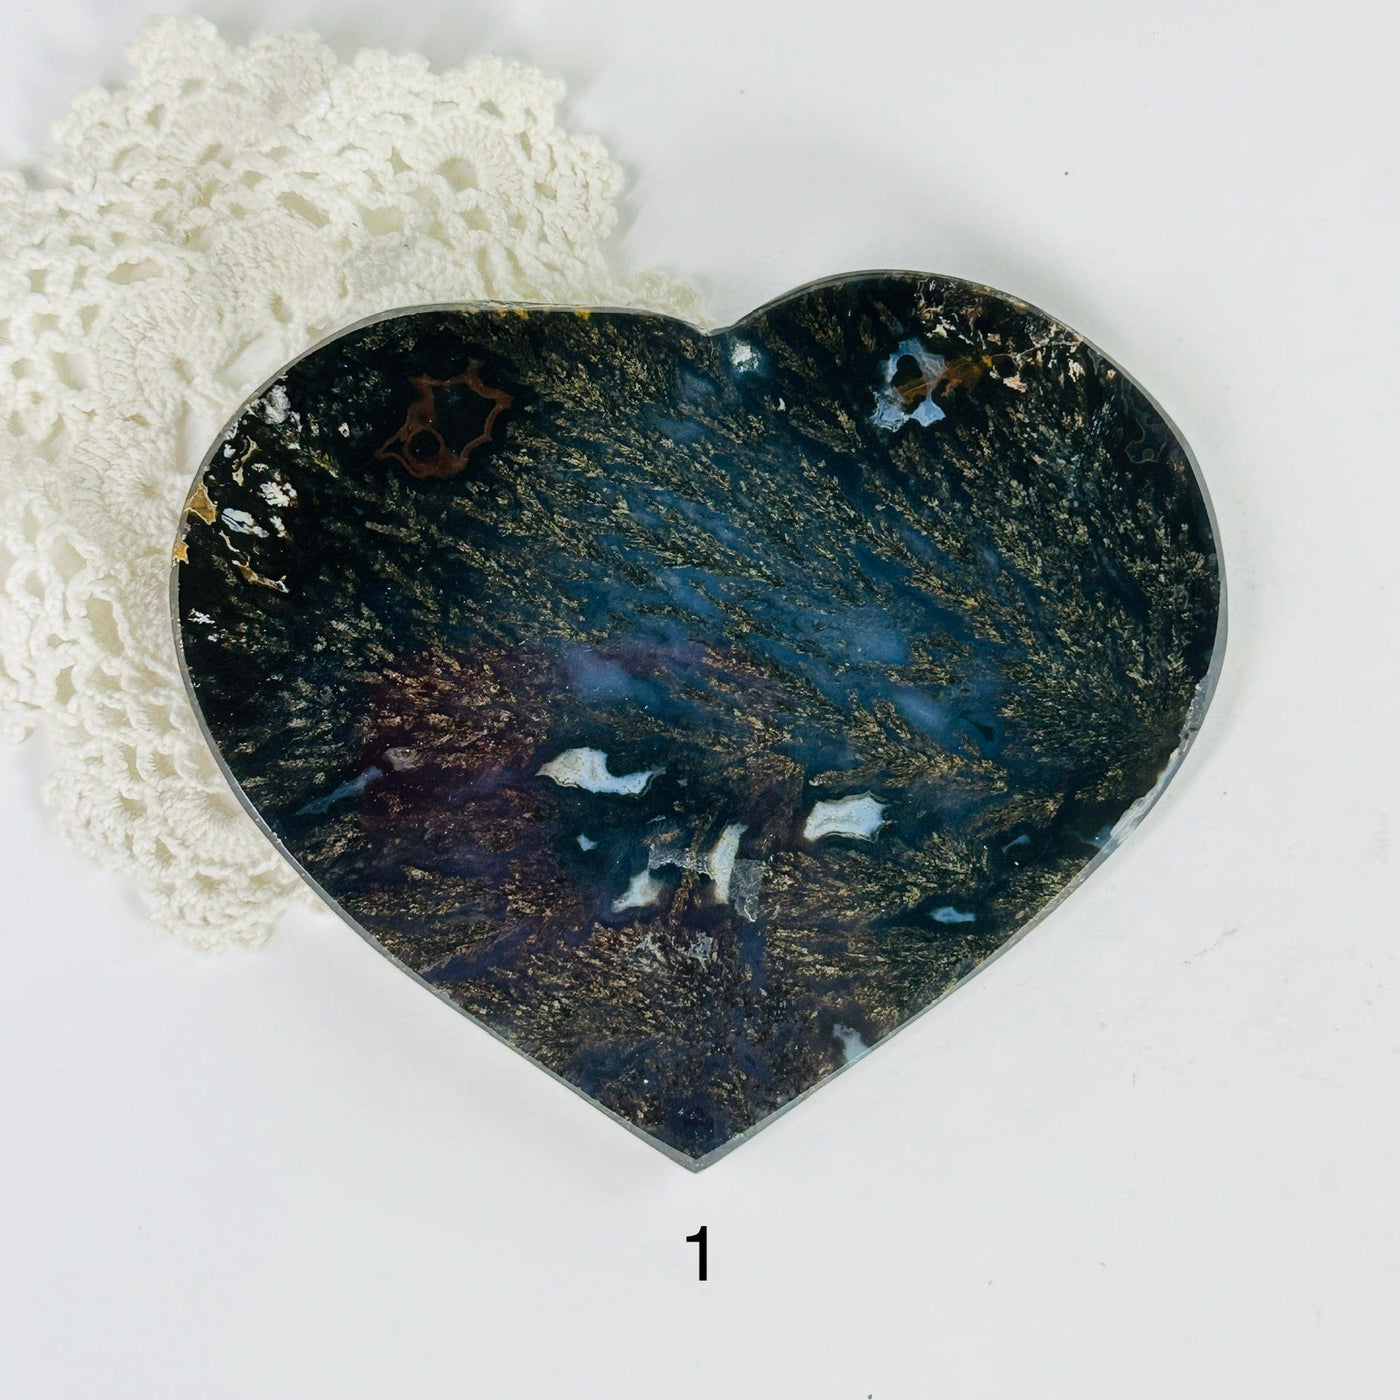 variant 1 of agate heart on white background